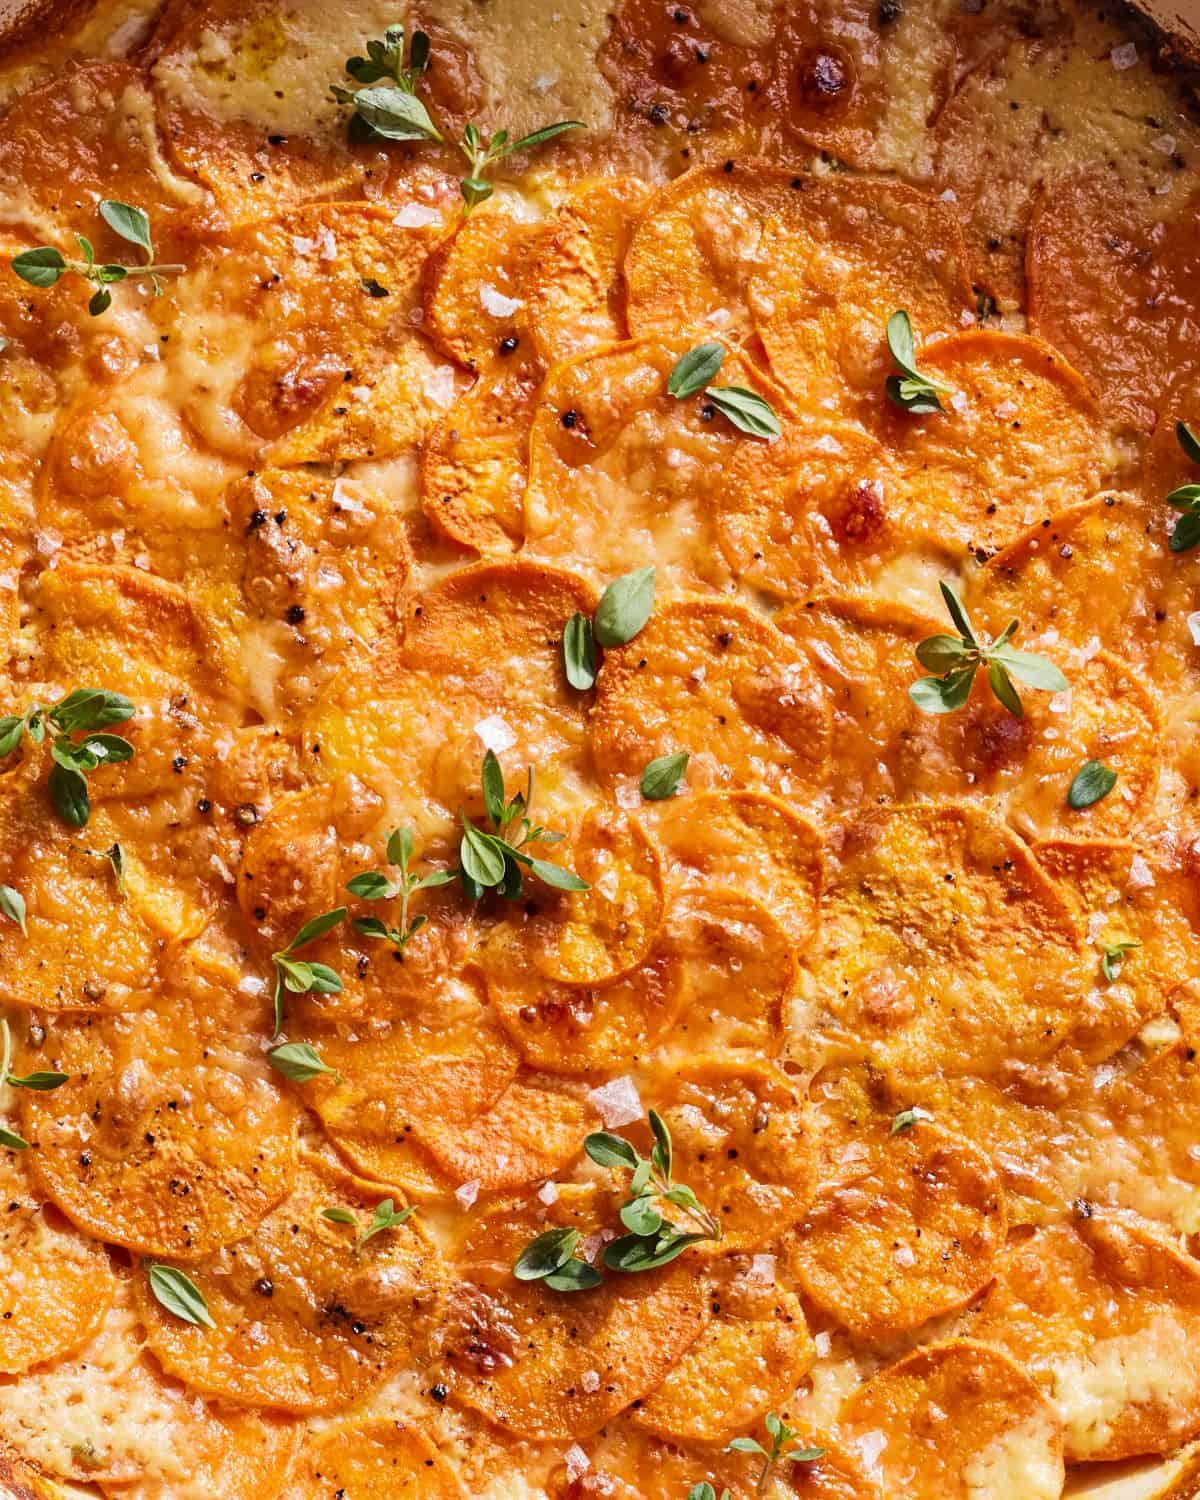 A close up shot of sweet potato gratin garnished with thyme.